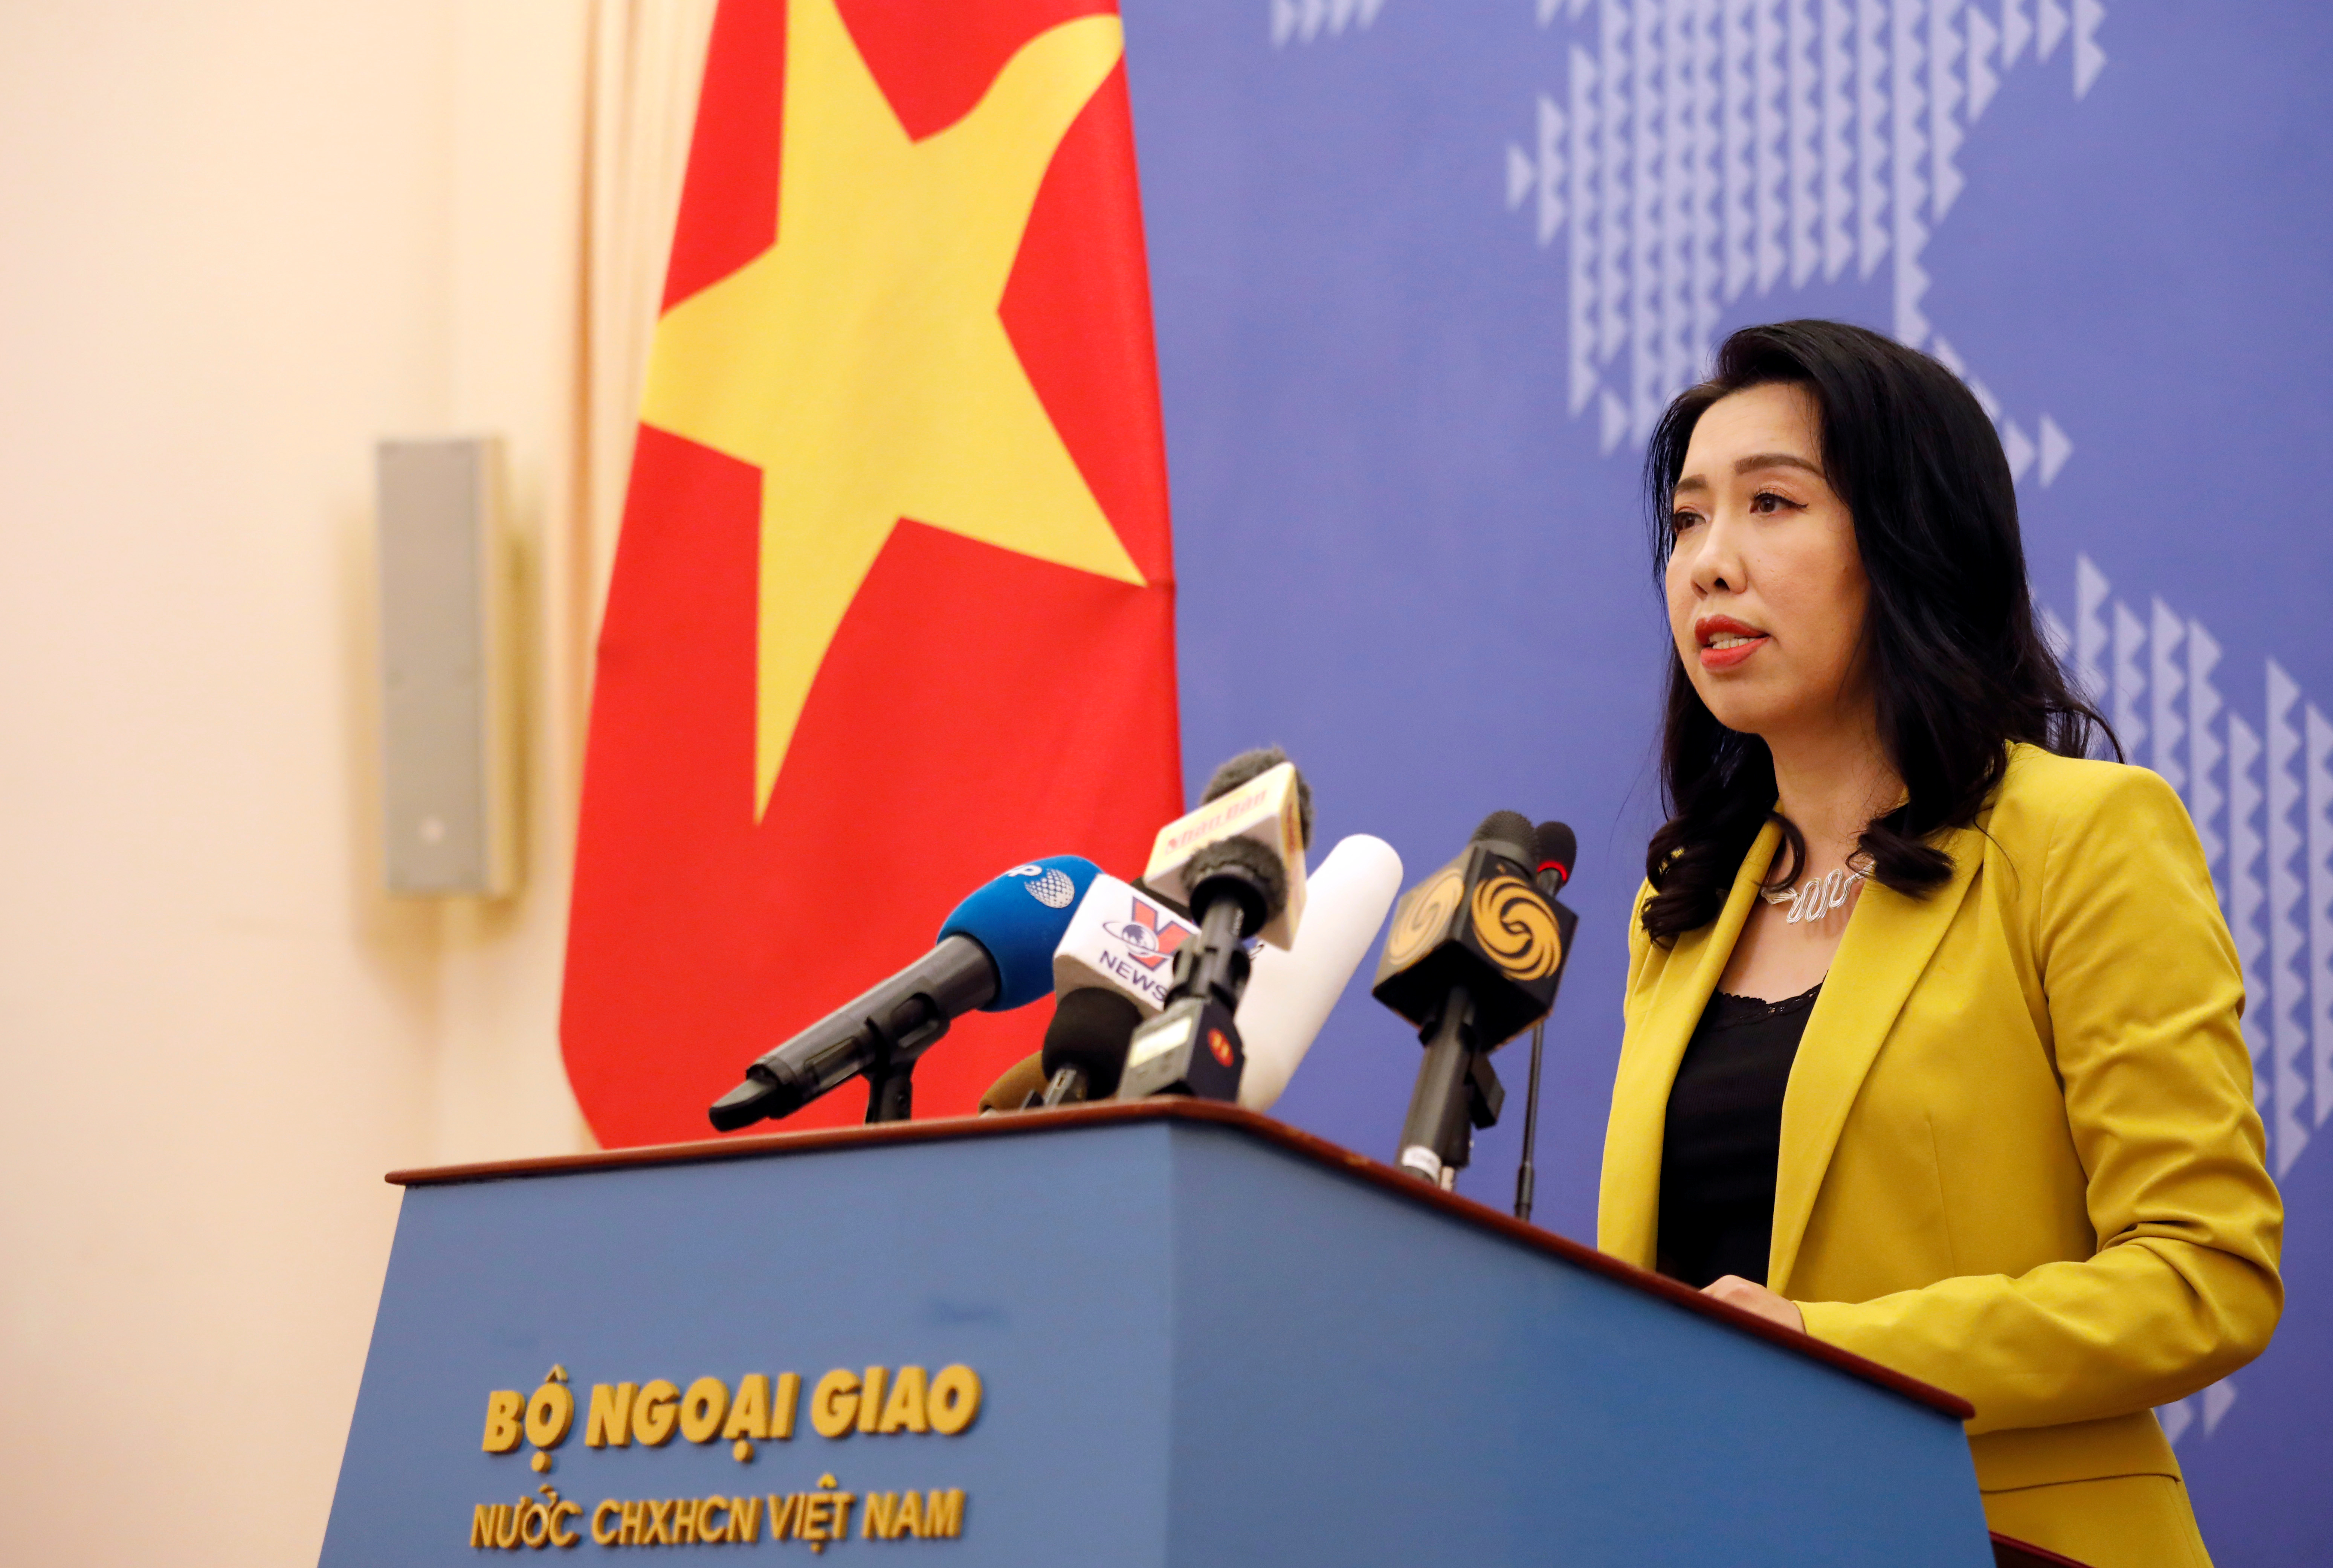 Vietnamese foreign ministry spokeswoman Le Thi Thu Hang speaks at a news conference in Hanoi